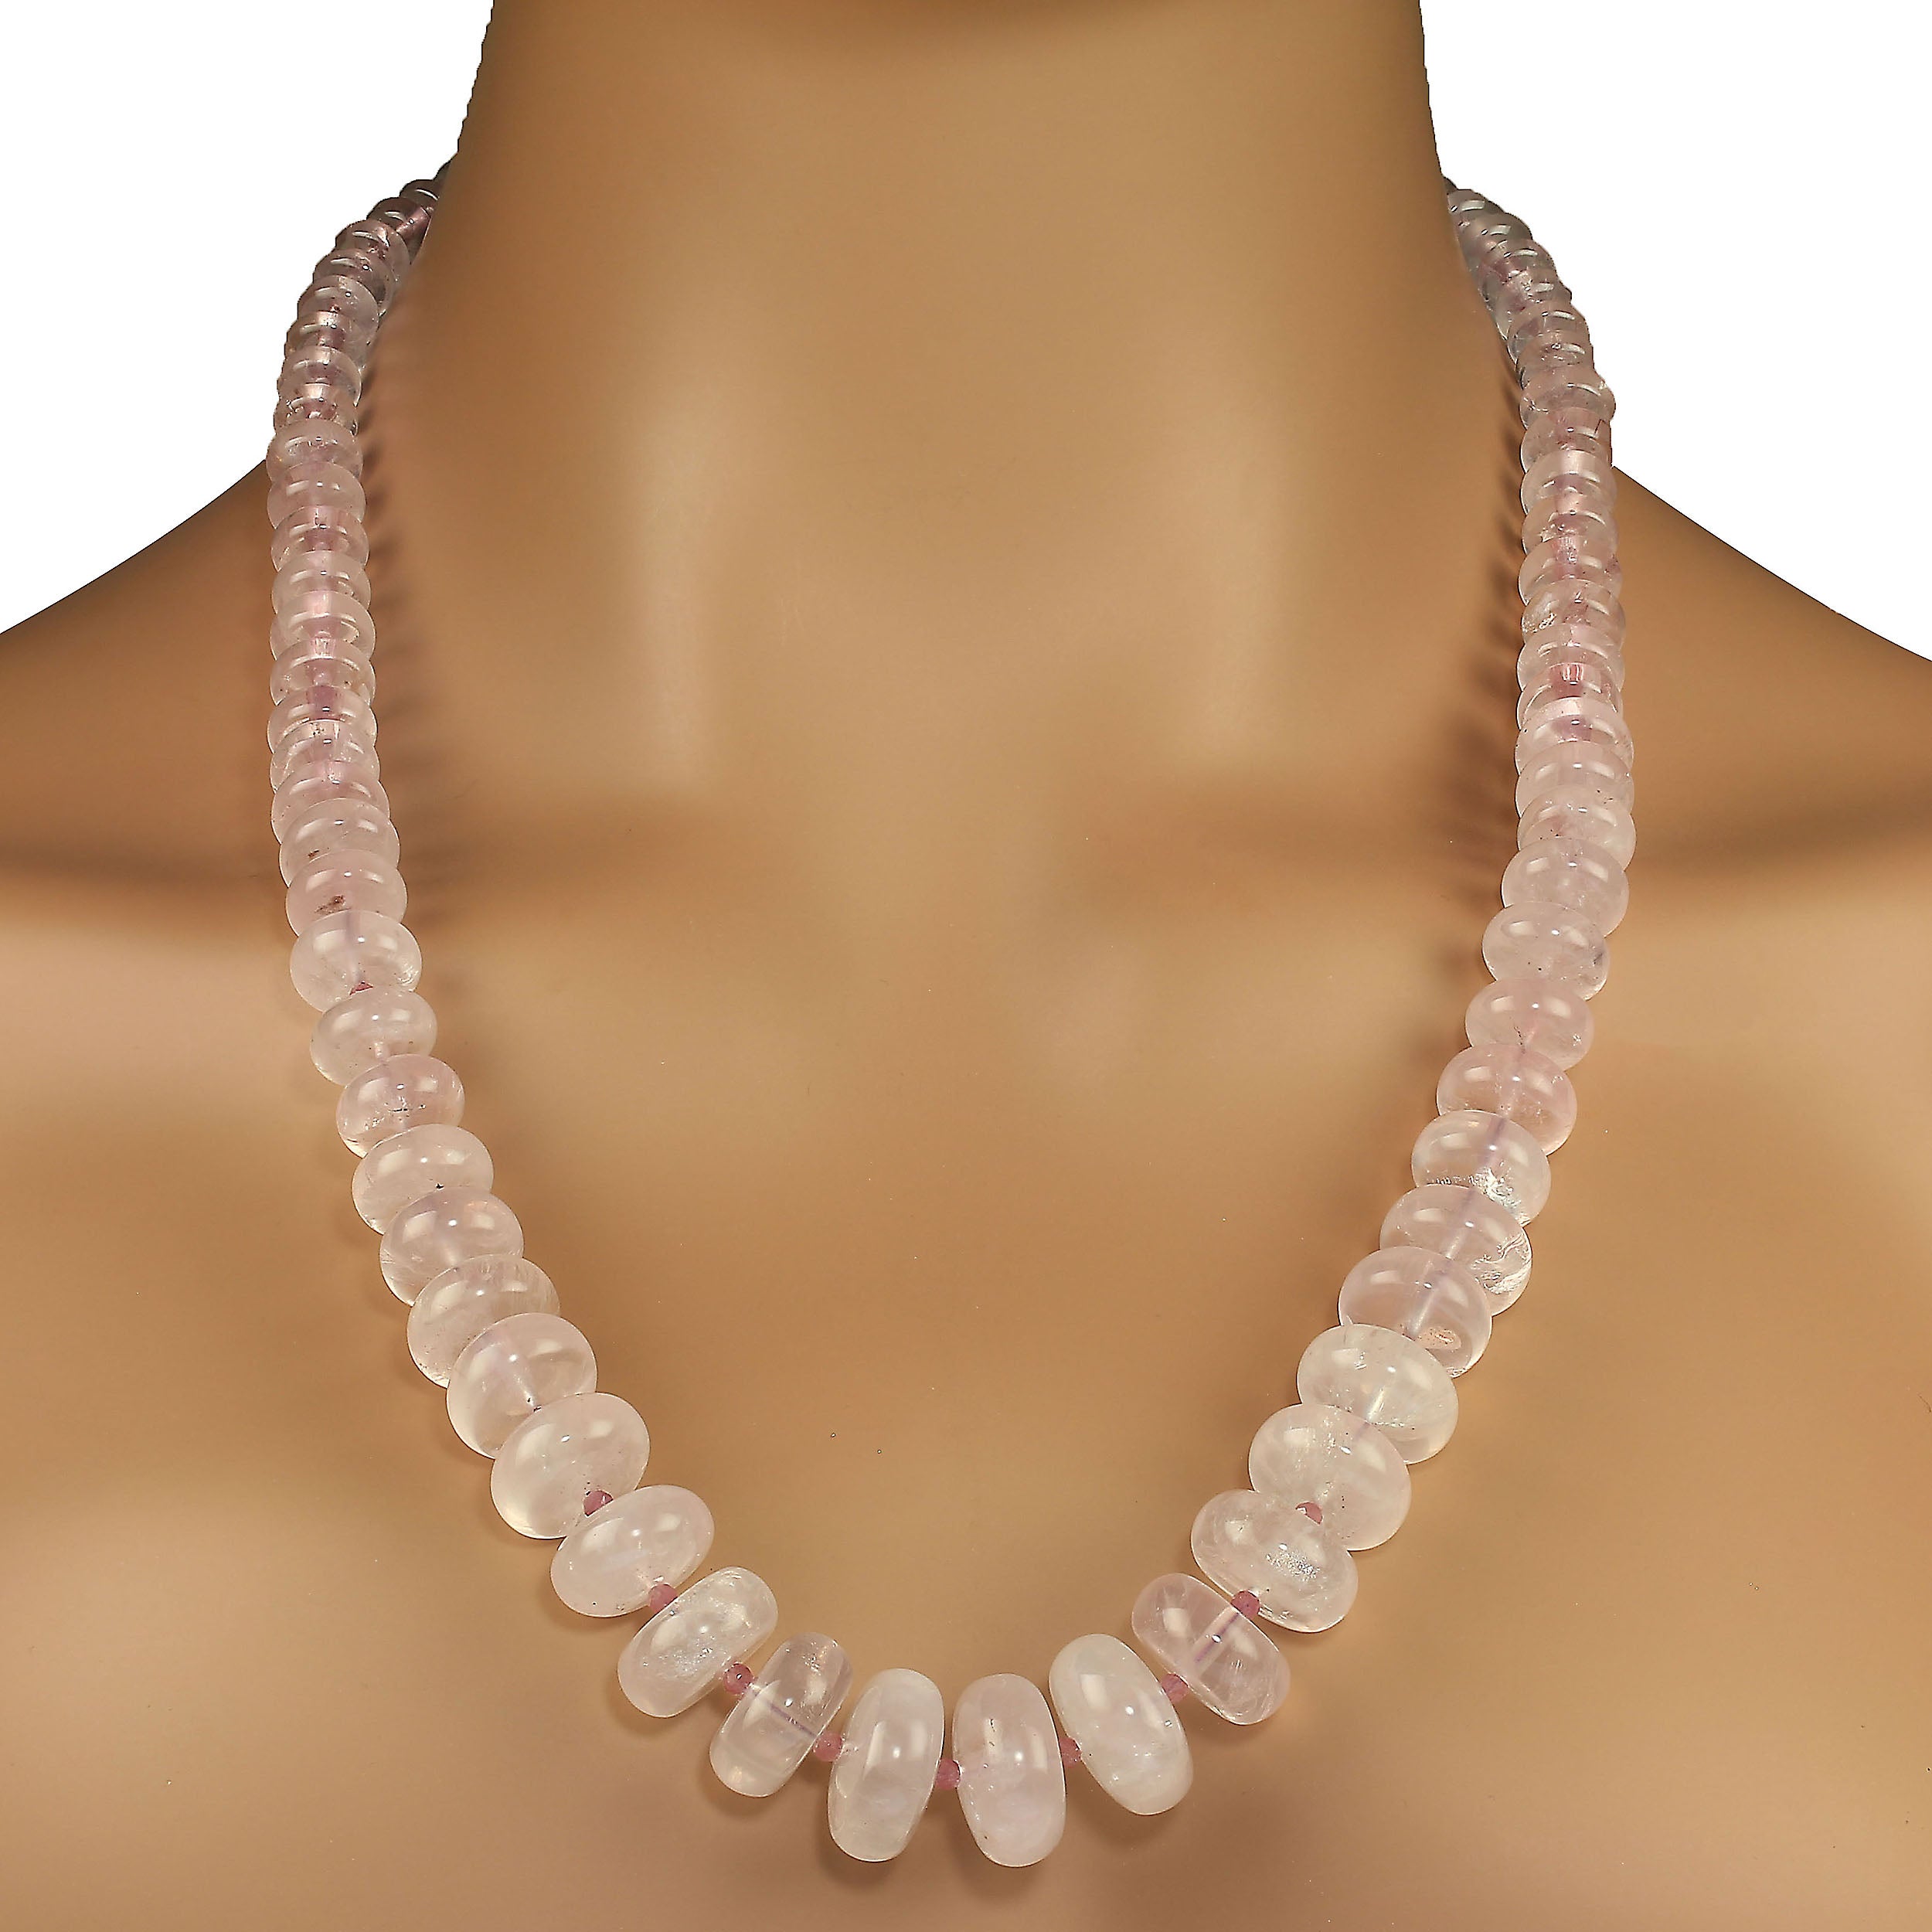 AJD 24 Inch Graduated Rose Quartz Necklace Perfect Valentine's Day Gift! For Sale